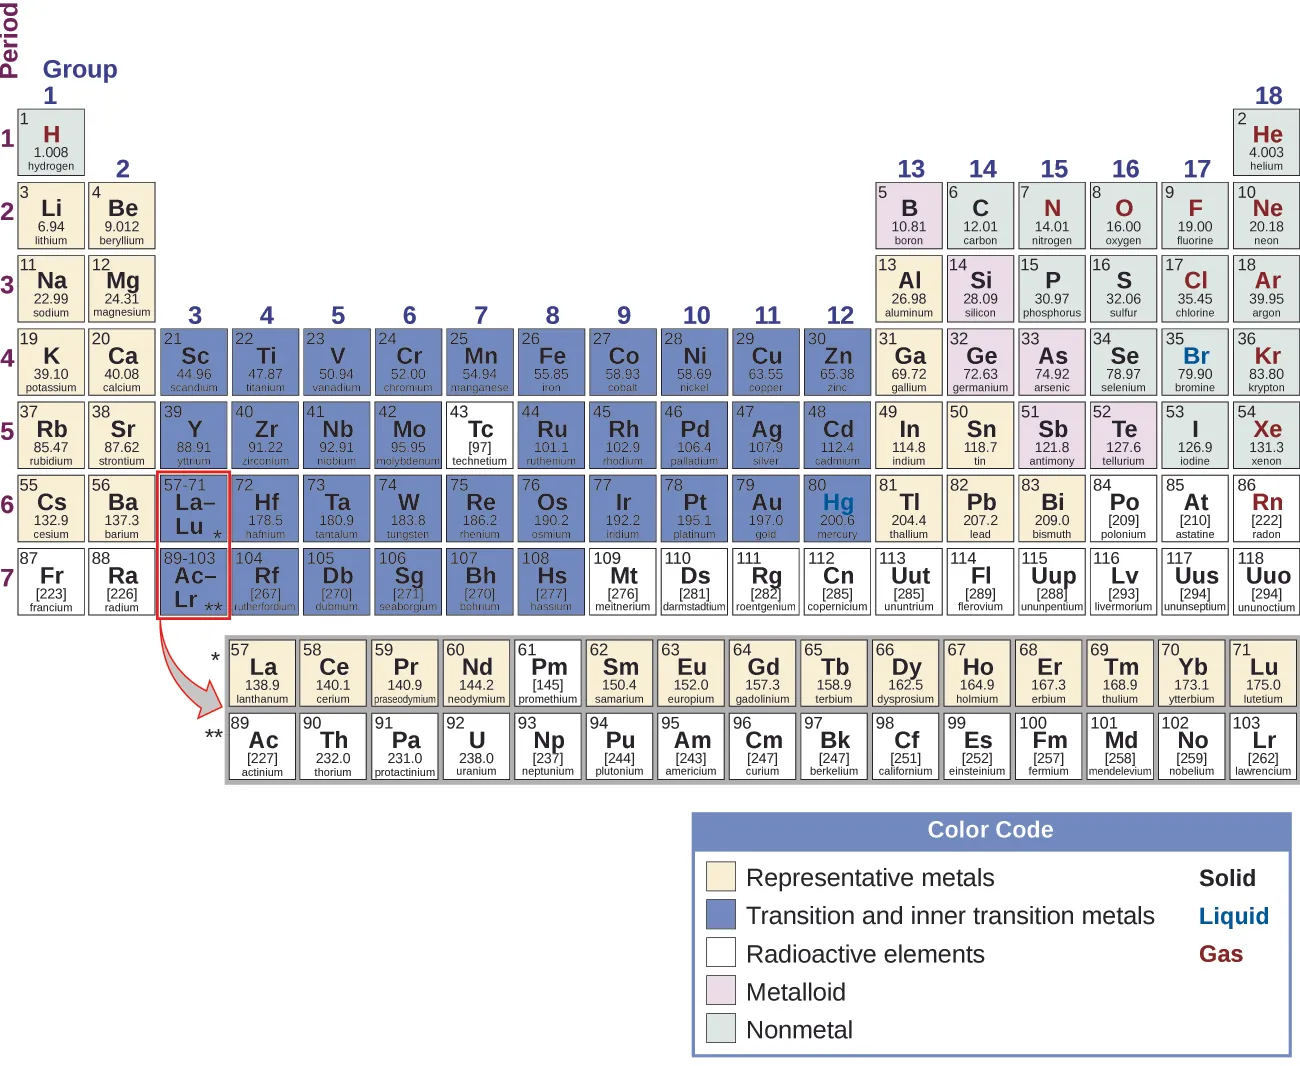 The Periodic Table of Elements is shown. The 18 columns are labeled “Group” and the 7 rows are labeled “Period.” Below the table to the right is a box labeled “Color Code” with different colors for representative metals, transition and inner transition metals, radioactive elements, metalloids, and nonmetals, as well as solids, liquids, and gases. Each element will be described in this order: atomic number; name; symbol; whether it is a representative metal, transition and inner transition metal, radioactive element, metalloid, or nonmetal; whether it is a solid, liquid, or gas; and atomic mass. Beginning at the top left of the table, or period 1, group 1, is a box containing “1; hydrogen; H; nonmetal; gas; and 1.008.” There is only one other element box in period 1, group 18, which contains “2; helium; H e; nonmetal; gas; and 4.003.” Period 2, group 1 contains “3; lithium; L i; representative metal; solid; and 6.94” Group 2 contains “4; beryllium; B e; representative metal; solid; and 9.012.” Groups 3 through 12 are skipped and group 13 contains “5; boron; B; metalloid; solid; 10.81.” Group 14 contains “6; carbon; C; nonmetal; solid; and 12.01.” Group 15 contains “7; nitrogen; N; nonmetal; gas; and 14.01.” Group 16 contains “8; oxygen; O; nonmetal; gas; and 16.00.” Group 17 contains “9; fluorine; F; nonmetal; gas; and 19.00.” Group 18 contains “10; neon; N e; nonmetal; gas; and 20.18.” Period 3, group 1 contains “11; sodium; N a; representative metal; solid; and 22.99.” Group 2 contains “12; magnesium; M g; representative metal; solid; and 24.31.” Groups 3 through 12 are skipped again in period 3 and group 13 contains “13; aluminum; A l; representative metal; solid; and 26.98.” Group 14 contains “14; silicon; S i; metalloid; solid; and 28.09.” Group 15 contains “15; phosphorous; P; nonmetal; solid; and 30.97.” Group 16 contains “16; sulfur; S; nonmetal; solid; and 32.06.” Group 17 contains “17; chlorine; C l; nonmetal; gas; and 35.45.” Group 18 contains “18; argon; A r; nonmetal; gas; and 39.95.” Period 4, group 1 contains “19; potassium; K; representative metal; solid; and 39.10.” Group 2 contains “20; calcium; C a; representative metal; solid; and 40.08.” Group 3 contains “21; scandium; S c; transition and inner transition metal; solid; and 44.96.” Group 4 contains “22; titanium; T i; transition and inner transition metal; solid; and 47.87.” Group 5 contains “23; vanadium; V; transition and inner transition metal; solid; and 50.94.” Group 6 contains “24; chromium; C r; transition and inner transition metal; solid; and 52.00.” Group 7 contains “25; manganese; M n; transition and inner transition metal; solid; and 54.94.” Group 8 contains “26; iron; F e; transition and inner transition metal; solid; and 55.85.” Group 9 contains “27; cobalt; C o; transition and inner transition metal; solid; and 58.93.” Group 10 contains “28; nickel; N i; transition and inner transition metal; solid; and 58.69.” Group 11 contains “29; copper; C u; transition and inner transition metal; solid; and 63.55.” Group 12 contains “30; zinc; Z n; transition and inner transition metal; solid; and 65.38.” Group 13 contains “31; gallium; G a; representative metal; solid; and 69.72.” Group 14 contains “32; germanium; G e; metalloid; solid; and 72.63.” Group 15 contains “33; arsenic; A s; metalloid; solid; and 74.92.” Group 16 contains “34; selenium; S e; nonmetal; solid; and 78.97.” Group 17 contains “35; bromine; B r; nonmetal; liquid; and 79.90.” Group 18 contains “36; krypton; K r; nonmetal; gas; and 83.80.” Period 5, group 1 contains “37; rubidium; R b; representative metal; solid; and 85.47.” Group 2 contains “38; strontium; S r; representative metal; solid; and 87.62.” Group 3 contains “39; yttrium; Y; transition and inner transition metal; solid; and 88.91.” Group 4 contains “40; zirconium; Z r; transition and inner transition metal; solid; and 91.22.” Group 5 contains “41; niobium; N b; transition and inner transition metal; solid; and 92.91.” Group 6 contains “42; molybdenum; M o; transition and inner transition metal; solid; and 95.95.” Group 7 contains “43; technetium; T c; radioactive element; solid; and 97.” Group 8 contains “44; ruthenium; R u; transition and inner transition metal; solid; and 101.1.” Group 9 contains “45; rhodium; R h; transition and inner transition metal; solid; and 102.9.” Group 10 contains “46; palladium; P d; transition and inner transition metal; solid; and 106.4.” Group 11 contains “47; silver; A g; transition and inner transition metal; solid; and 107.9.” Group 12 contains “48; cadmium; C d; transition and inner transition metal; solid; and 112.4.” Group 13 contains “49; indium; I n; representative metal; solid; and 114.8.” Group 14 contains “50; tin; S n; representative metal; solid; and 118.7.” Group 15 contains “51; antimony; S b; metalloid; solid; and 121.8.” Group 16 contains “52; tellurium; T e; metalloid; solid; and 127.6.” Group 17 contains “53; iodine; I; nonmetal; solid; and 126.9.” Group 18 contains “54; xenon; X e; nonmetal; gas; and 131.3.” Period 6, group 1 contains “55; cesium; C s; representative metal; solid; and 132.9.” Group 2 contains “56; barium; B a; representative metal; solid; and 137.3.” Group 3 breaks the pattern. The box has a large arrow pointing to a row of elements below the table with atomic numbers ranging from 57-71. In sequential order by atomic number, the first box in this row contains “57; lanthanum; L a; representative metal; solid; and 138.9.” To its right, the next is “58; cerium; C e; representative metal; solid; and 140.1.” Next is “59; praseodymium; P r; representative metal; solid; and 140.9.” Next is “60; neodymium; N d; representative metal; solid; and 144.2.” Next is “61; promethium; P m; radioactive element; solid; and 145.” Next is “62; samarium; S m; representative metal; solid; and 150.4.” Next is “63; europium; E u; representative metal; solid; and 152.0.” Next is “64; gadolinium; G d; representative metal; solid; and 157.3.” Next is “65; terbium; T b; representative metal; solid; and 158.9.” Next is “66; dysprosium; D y; representative metal; solid; and 162.5.” Next is “67; holmium; H o; representative metal; solid; and 164.9.” Next is “68; erbium; E r; representative metal; solid; and 167.3.” Next is “69; thulium; T m; representative metal; solid; and 168.9.” Next is “70; ytterbium; Y b; representative metal; solid; and 173.1.” The last in this special row is “71; lutetium; L u; representative metal; solid; and 175.0.” Continuing in period 6, group 4 contains “72; hafnium; H f; transition and inner transition metal; solid; and 178.5.” Group 5 contains “73; tantalum; T a; transition and inner transition metal; solid; and 180.9.” Group 6 contains “74; tungsten; W; transition and inner transition metal; solid; and 183.8.” Group 7 contains “75; rhenium; R e; transition and inner transition metal; solid; and 186.2.” Group 8 contains “76; osmium; O s; transition and inner transition metal; solid; and 190.2.” Group 9 contains “77; iridium; I r; transition and inner transition metal; solid; and 192.2.” Group 10 contains “78; platinum; P t; transition and inner transition metal; solid; and 195.1.” Group 11 contains “79; gold; A u; transition and inner transition metal; solid; and 197.0.” Group 12 contains “80; mercury; H g; transition and inner transition metal; liquid; and 200.6.” Group 13 contains “81; thallium; T l; representative metal; solid; and 204.4.” Group 14 contains “82; lead; P b; representative metal; solid; and 207.2.” Group 15 contains “83; bismuth; B i; representative metal; solid; and 209.0.” Group 16 contains “84; polonium; P o; radioactive element; solid; and 209.” Group 17 contains “85; astatine; A t; radioactive element; solid; and 210.” Group 18 contains “86; radon; R n; radioactive element; gas; and 222.” Period 7, group 1 contains “87; francium; F r; radioactive element; solid; and 223.” Group 2 contains “88; radium; R a; radioactive element; solid; and 226.” Group 3 breaks the pattern much like what occurs in period 6. A large arrow points from the box in period 7, group 3 to a special row containing the elements with atomic numbers ranging from 89-103, just below the row which contains atomic numbers 57-71. In sequential order by atomic number, the first box in this row contains “89; actinium; A c; radioactive element; solid; and 227.” To its right, the next is “90; thorium; T h; radioactive element; solid; and 232.0.” Next is “91; protactinium; P a; radioactive element; solid; and 231.0.” Next is “92; uranium; U; radioactive element; solid; and 238.0.” Next is “93; neptunium; N p; radioactive element; solid; and N p.” Next is “94; plutonium; P u; radioactive element; solid; and 244.” Next is “95; americium; A m; radioactive element; solid; and 243.” Next is “96; curium; C m; radioactive element; solid; and 247.” Next is “97; berkelium; B k; radioactive element; solid; and 247.” Next is “98; californium; C f; radioactive element; solid; and 251.” Next is “99; einsteinium; E s; radioactive element; solid; and 252.” Next is “100; fermium; F m; radioactive element; solid; and 257.” Next is “101; mendelevium; M d; radioactive element; solid; and 258.” Next is “102; nobelium; N o; radioactive element; solid; and 259.” The last in this special row is “103; lawrencium; L r; radioactive element; solid; and 262.” Continuing in period 7, group 4 contains “104; rutherfordium; R f; transition and inner transition metal; solid; and 267.” Group 5 contains “105; dubnium; D b; transition and inner transition metal; solid; and 270.” Group 6 contains “106; seaborgium; S g; transition and inner transition metal; solid; and 271.” Group 7 contains “107; bohrium; B h; transition and inner transition metal; solid; and 270.” Group 8 contains “108; hassium; H s; transition and inner transition metal; solid; and 277.” Group 9 contains “109; meitnerium; M t; radioactive element; solid; and 276.” Group 10 contains “110; darmstadtium; D s; radioactive element; solid; and 281.” Group 11 contains “111; roentgenium; R g; radioactive element; solid; and 282.” Group 12 contains “112; copernicium; C n; radioactive element; liquid; and 285.” Group 13 contains “113; ununtrium; U u t; radioactive element; solid; and 285.” Group 14 contains “114; flerovium; F l; radioactive element; solid; and 289.” Group 15 contains “115; ununpentium; U u p; radioactive element; solid; and 288.” Group 16 contains “116; livermorium; L v; radioactive element; solid; and 293.” Group 17 contains “117; ununseptium; U u s; radioactive; solid; and 294.” Group 18 contains “118; ununoctium; U u o; radioactive element; solid; and 294.”